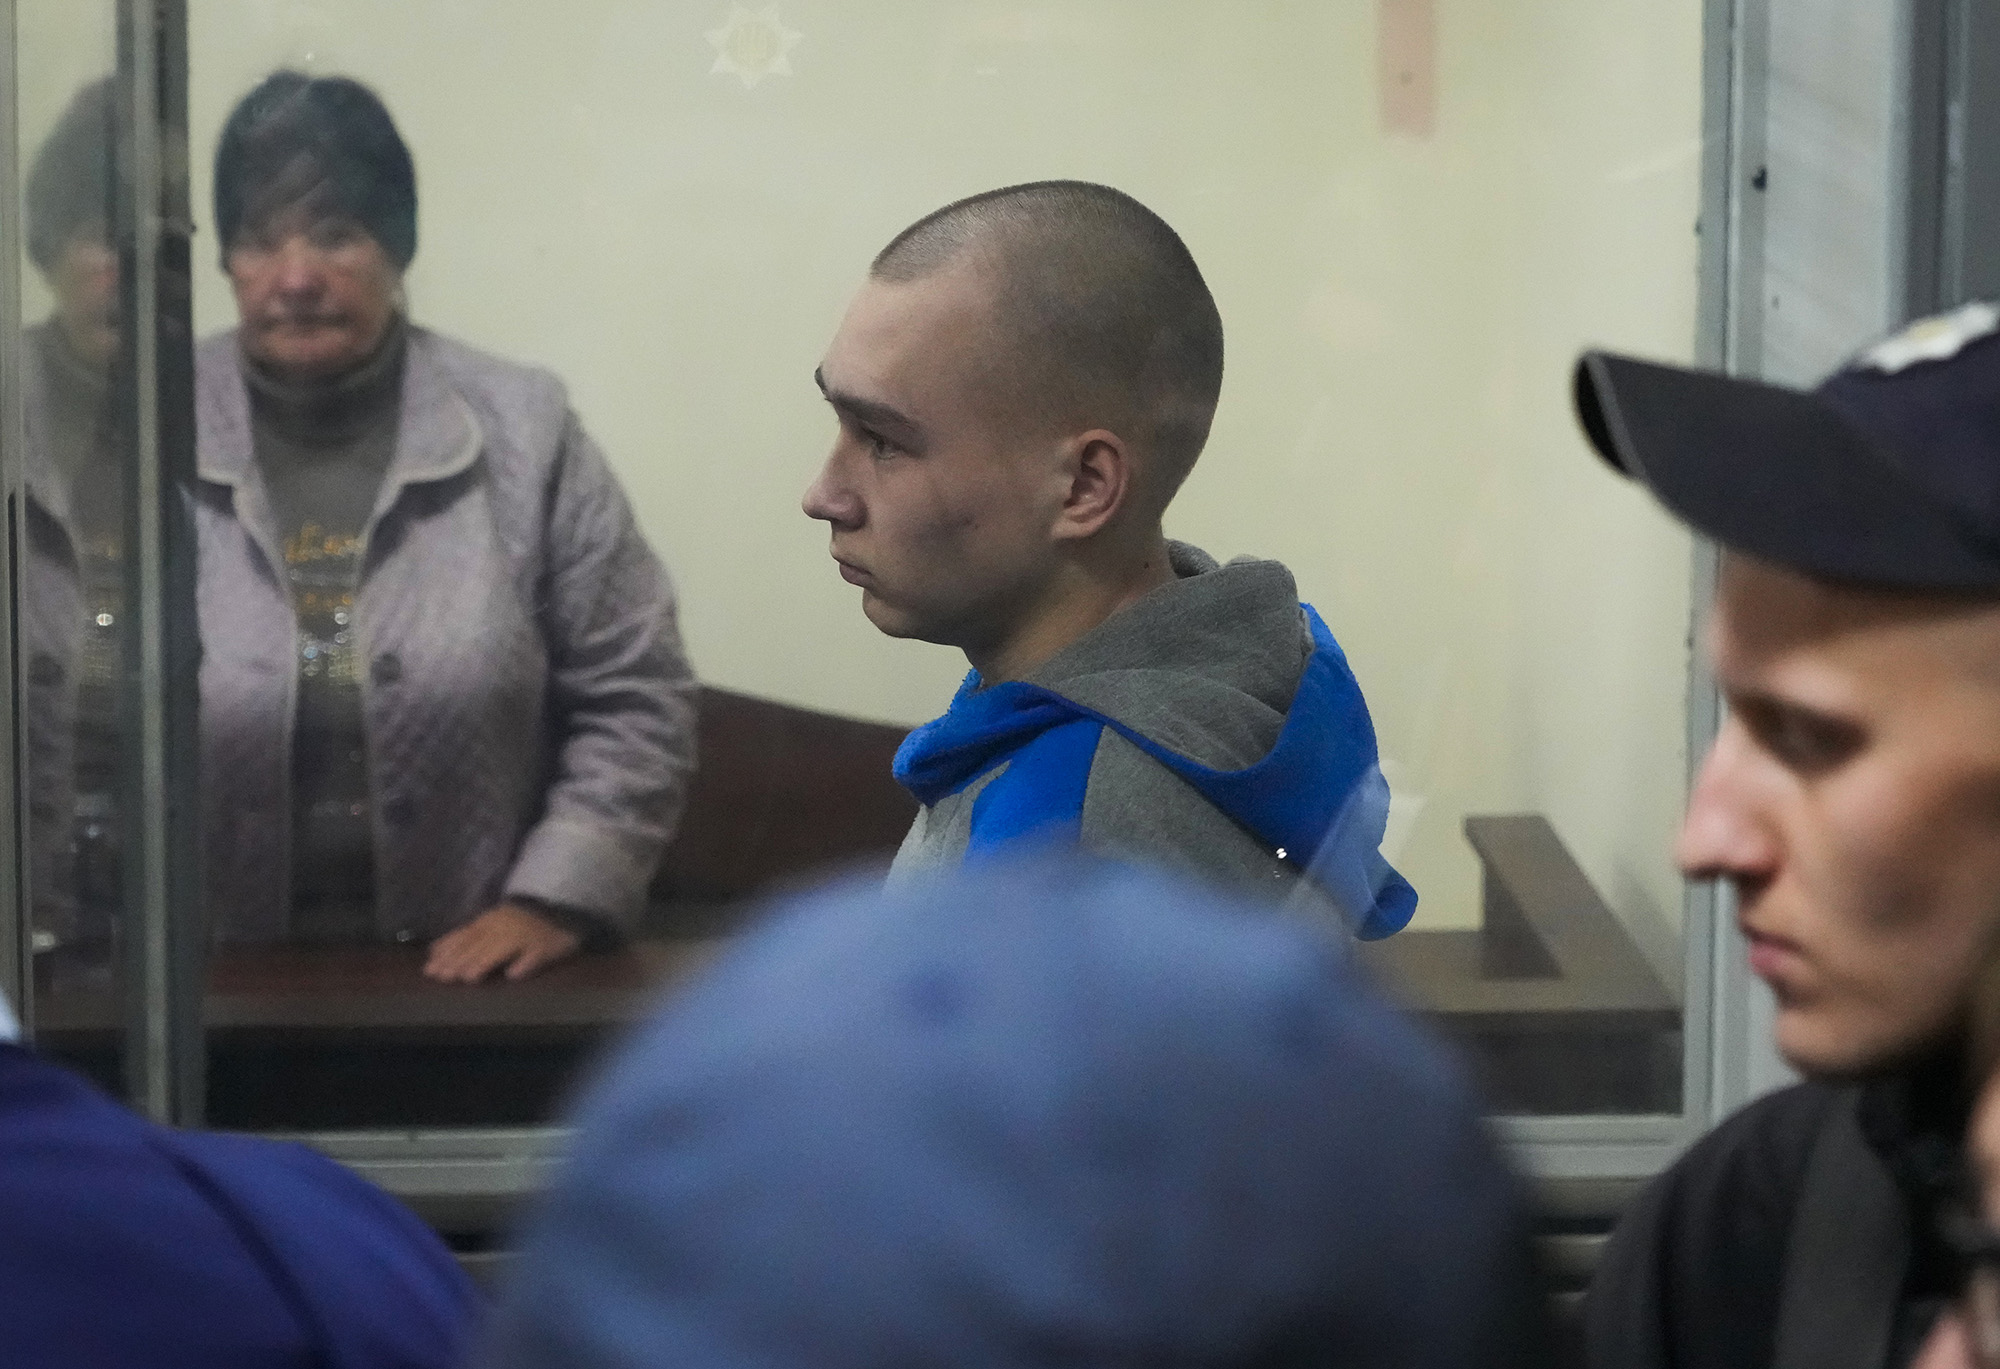 War crimes trial for Russian soldier in Ukraine adjourned until Thursday after he pleads guilty